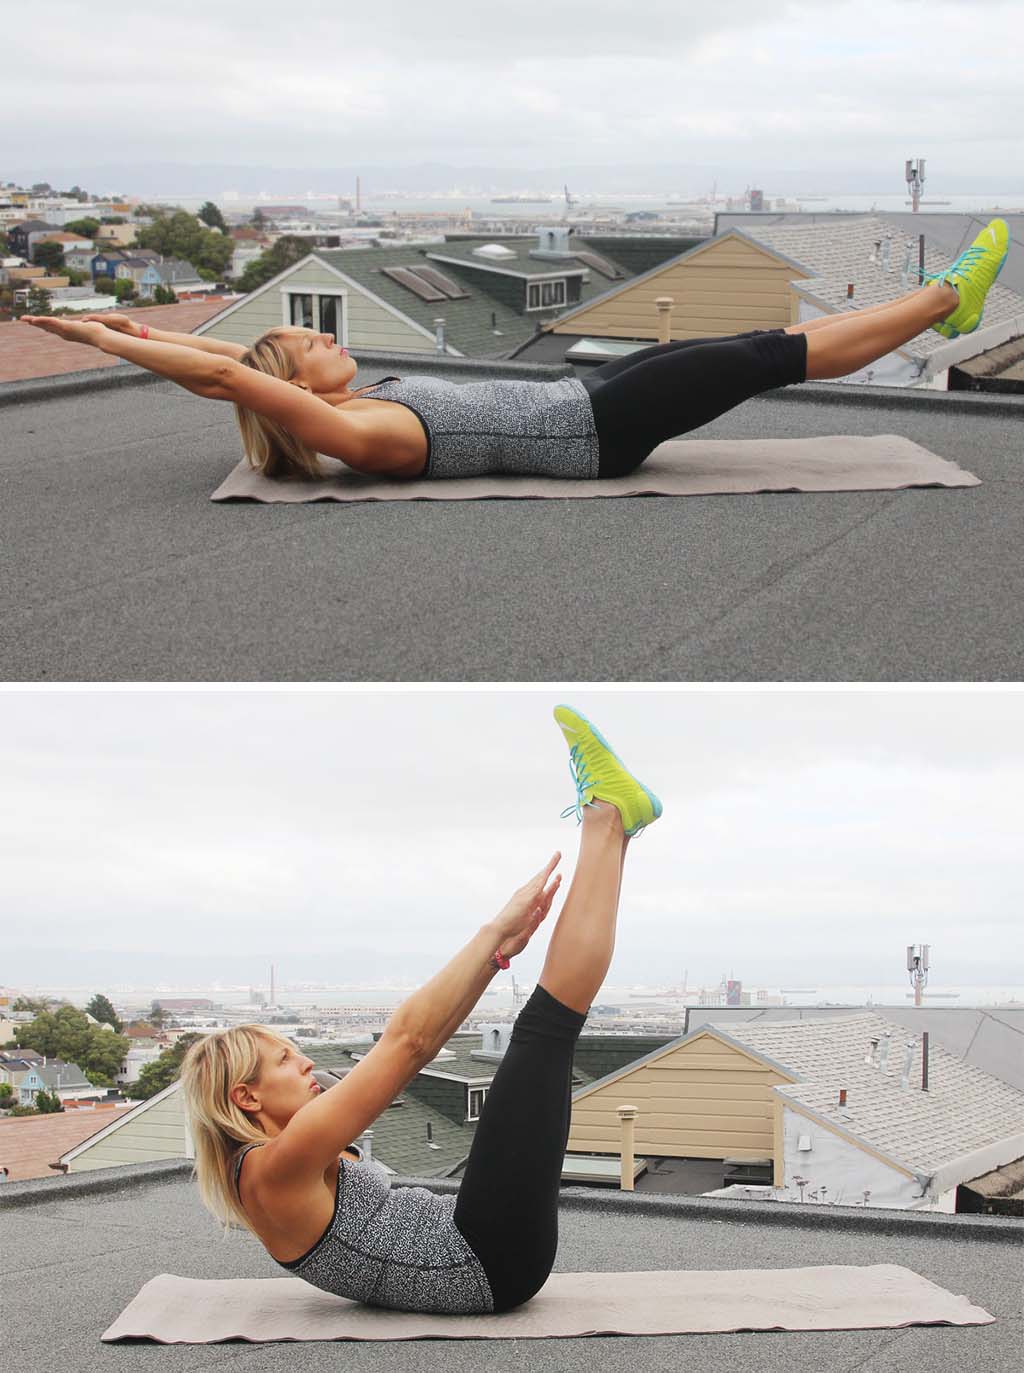 Exercises To Get Flat Stomach & The Sexiest Abs #4: How To Make V-Ups